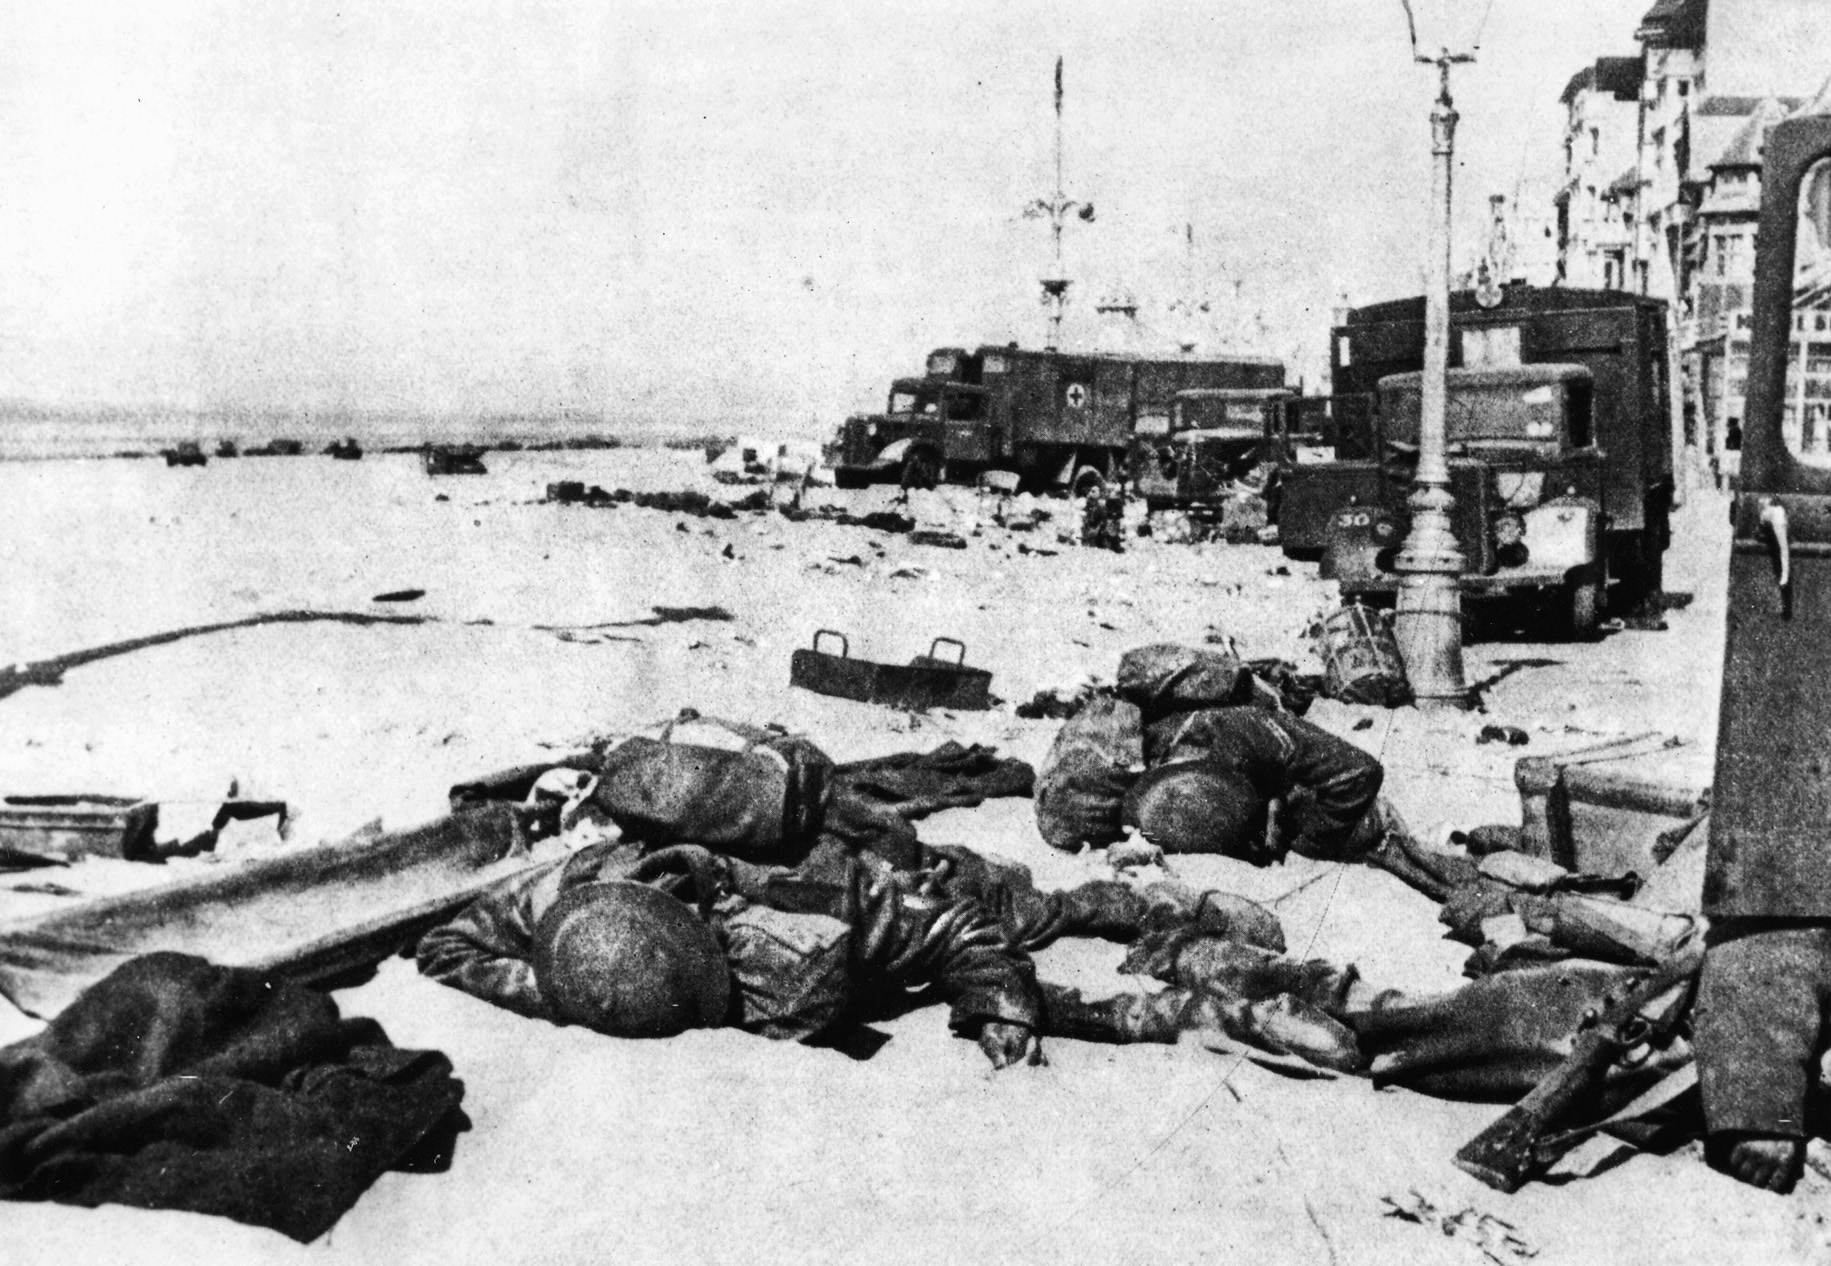 British dead and the debris of war litters the beach at Dunkirk following the British evacuation during Operation Dynamo. The Germans captured large quantities of weapons and supplies, while 50,000 British  soldiers were left in France,11,000 of them killed and the remainder taken prisoner. 